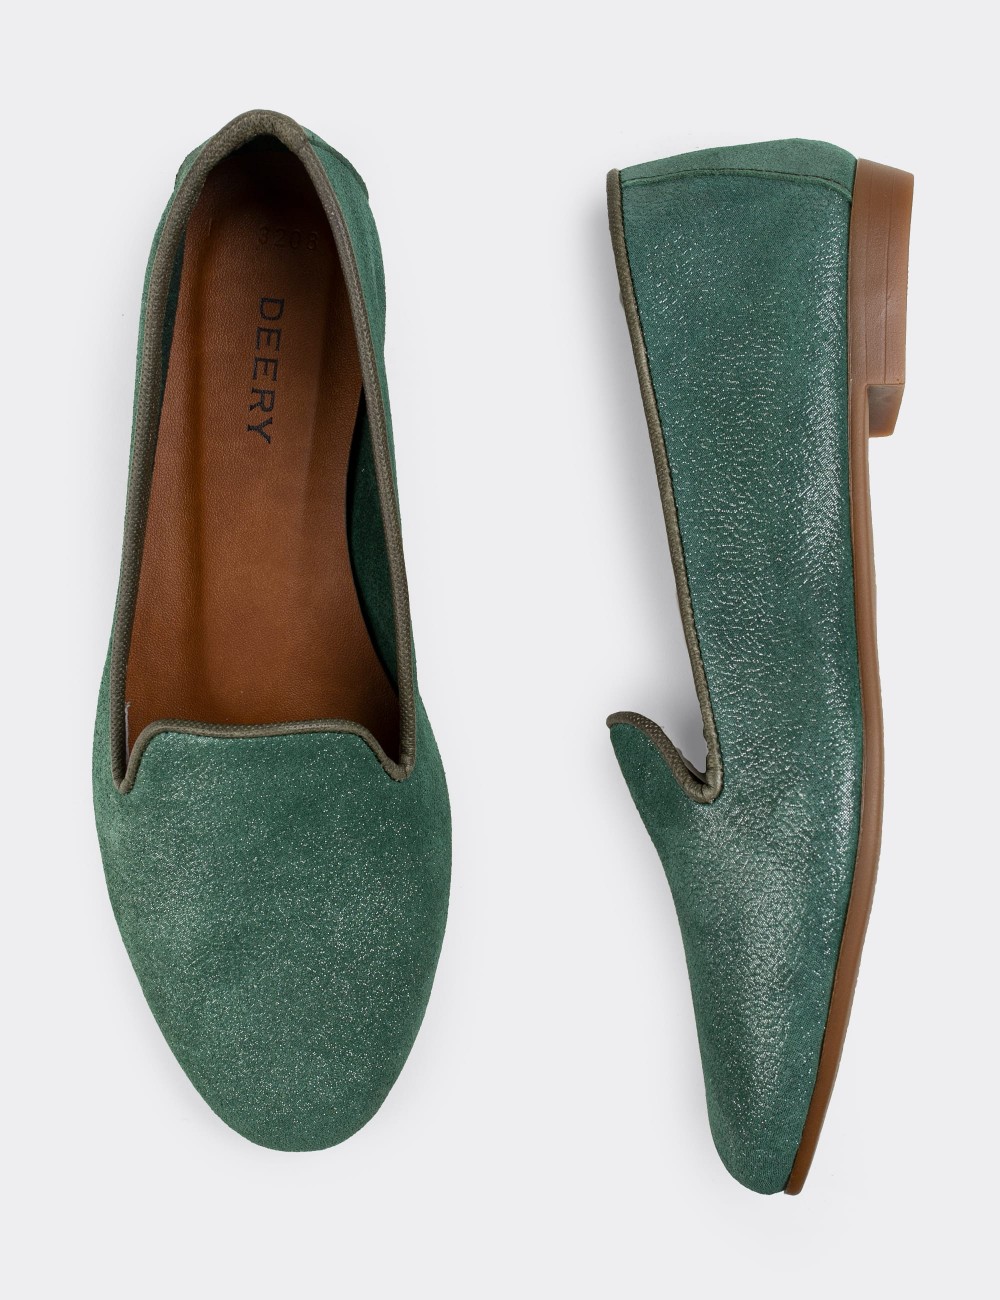 Green Suede Leather Loafers  - E3208ZYSLC01